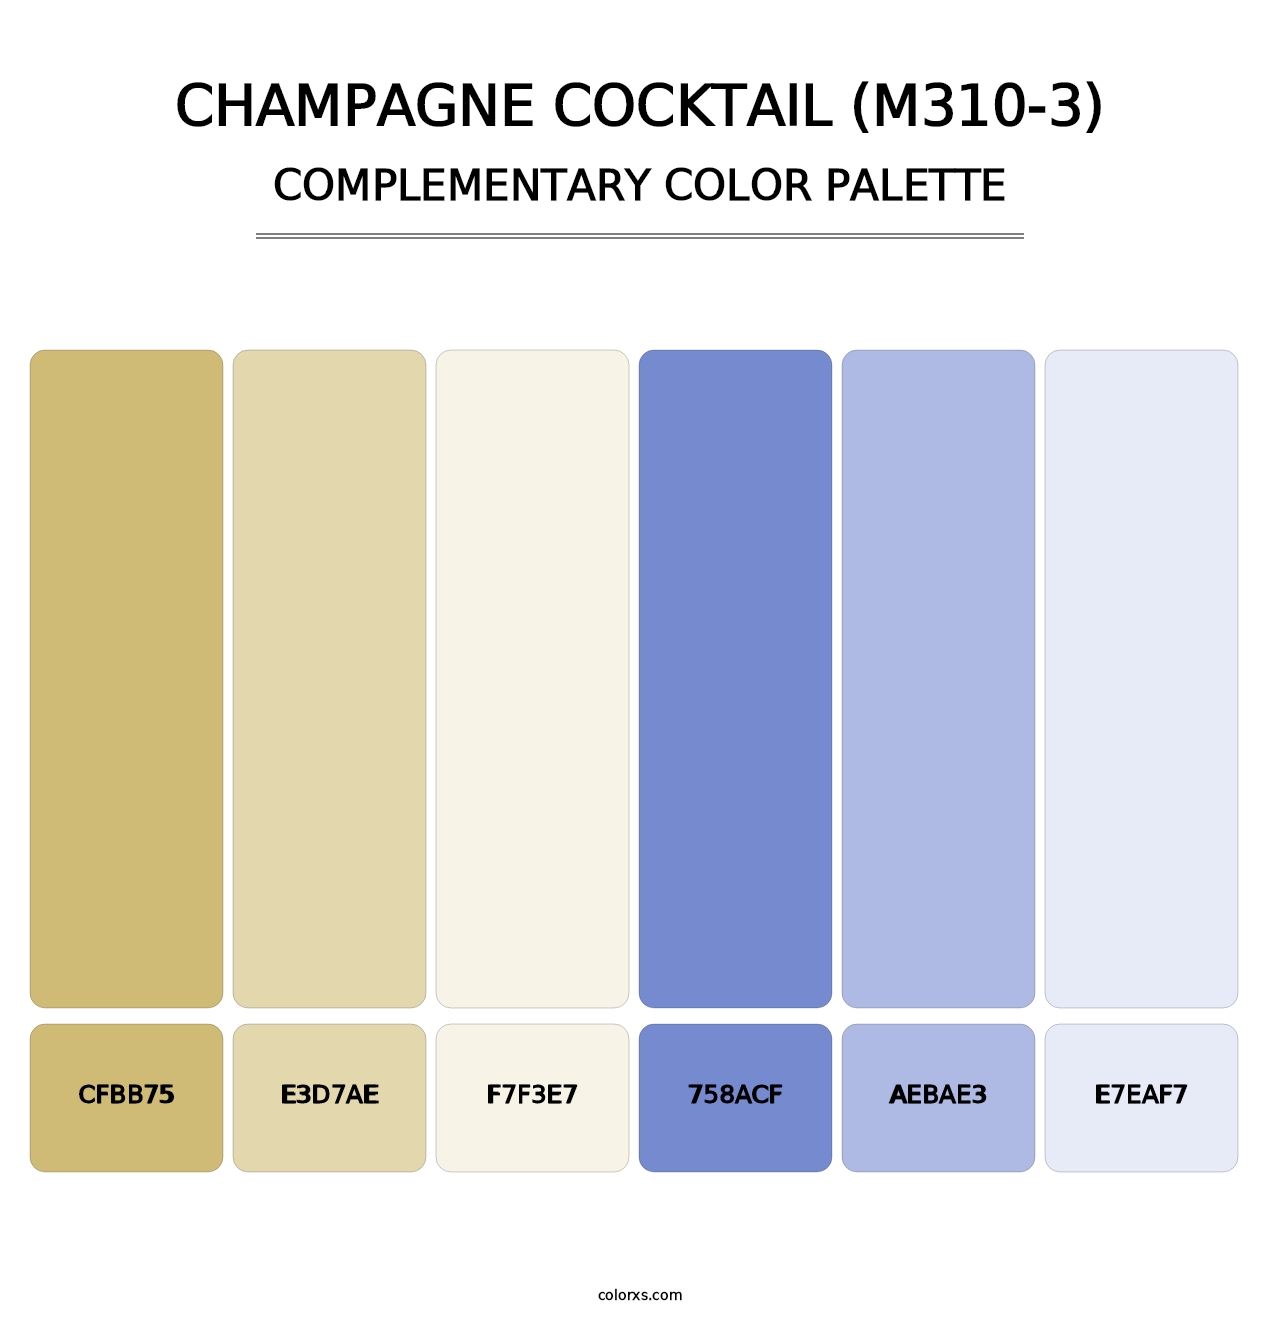 Champagne Cocktail (M310-3) - Complementary Color Palette